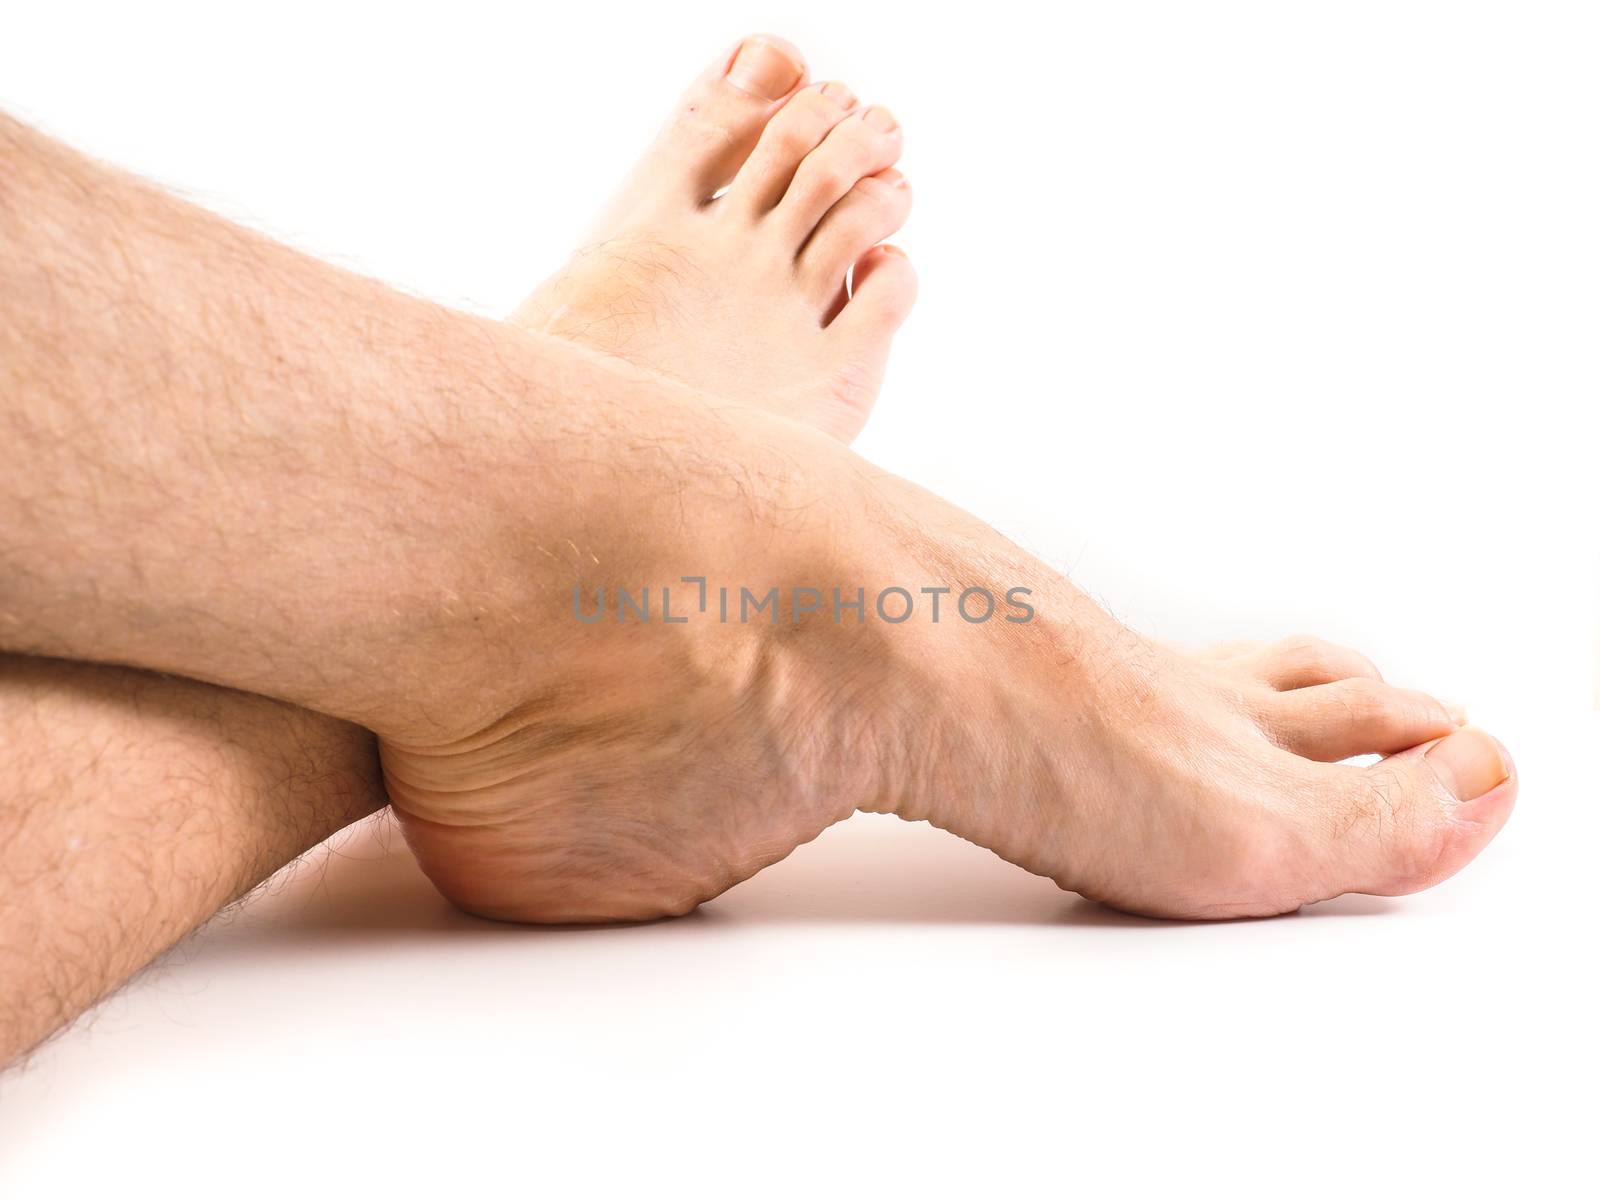 Hairy legs and feet of male person resting towards white background